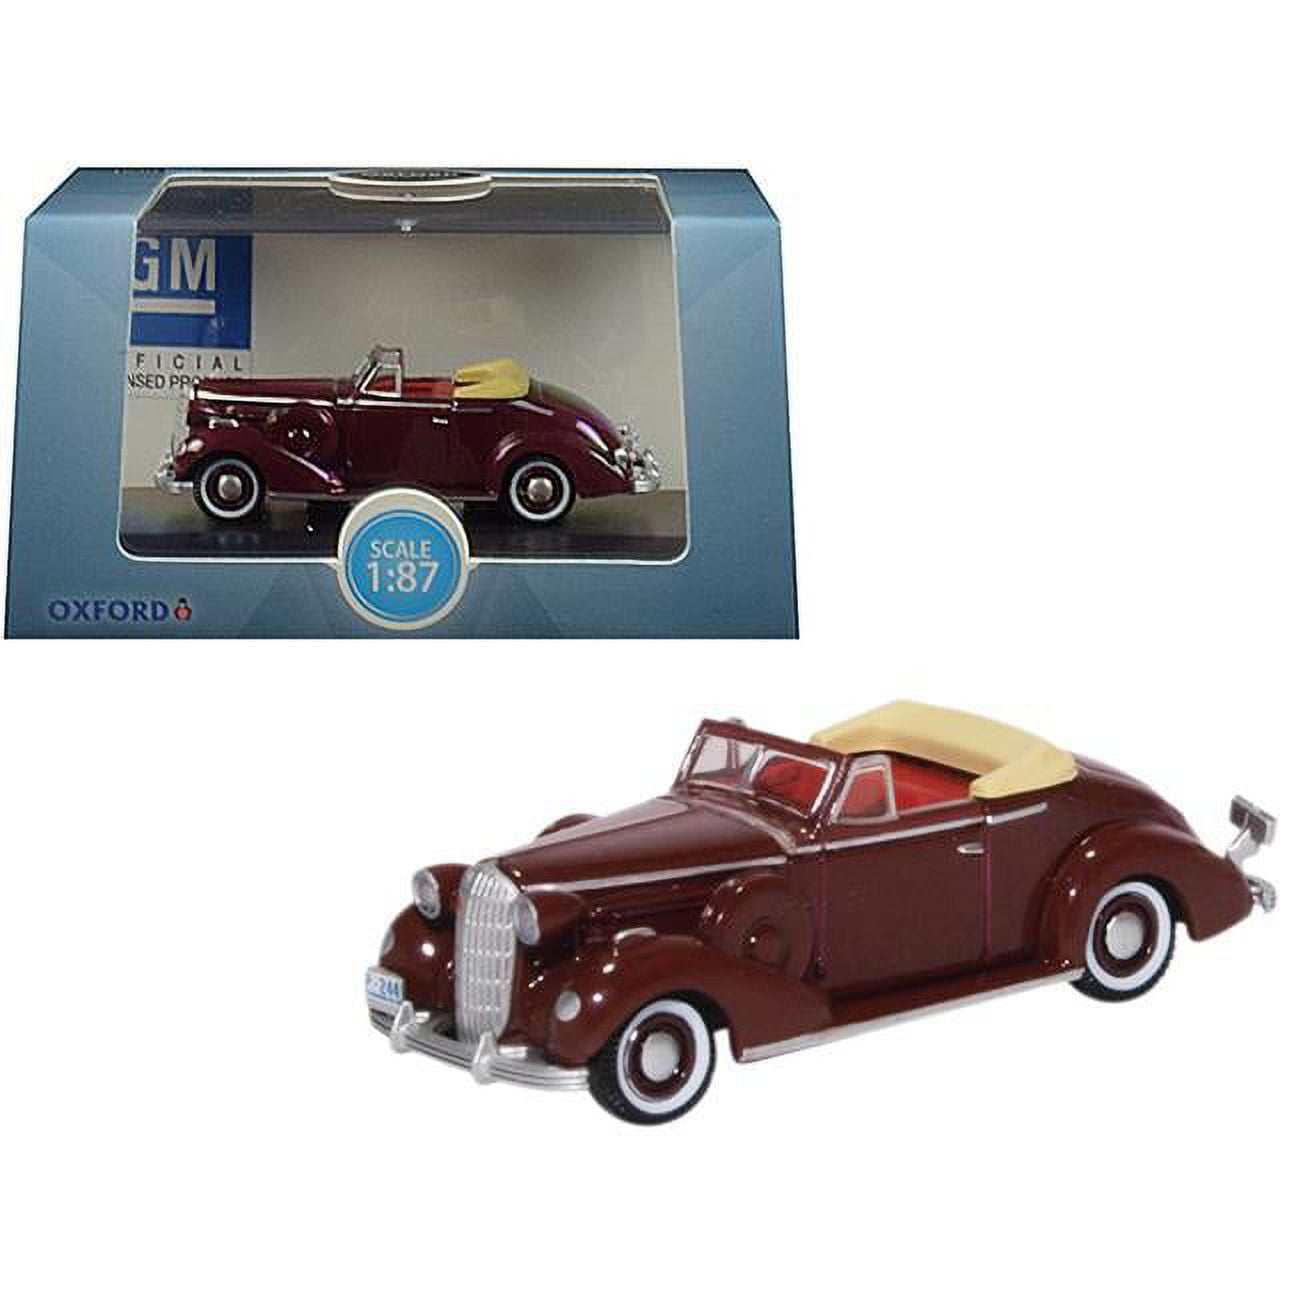 87bs36003 1936 Buick Special Convertible Coupe Cardinal Maroon 1-87 Ho Scale Diecast Model Car